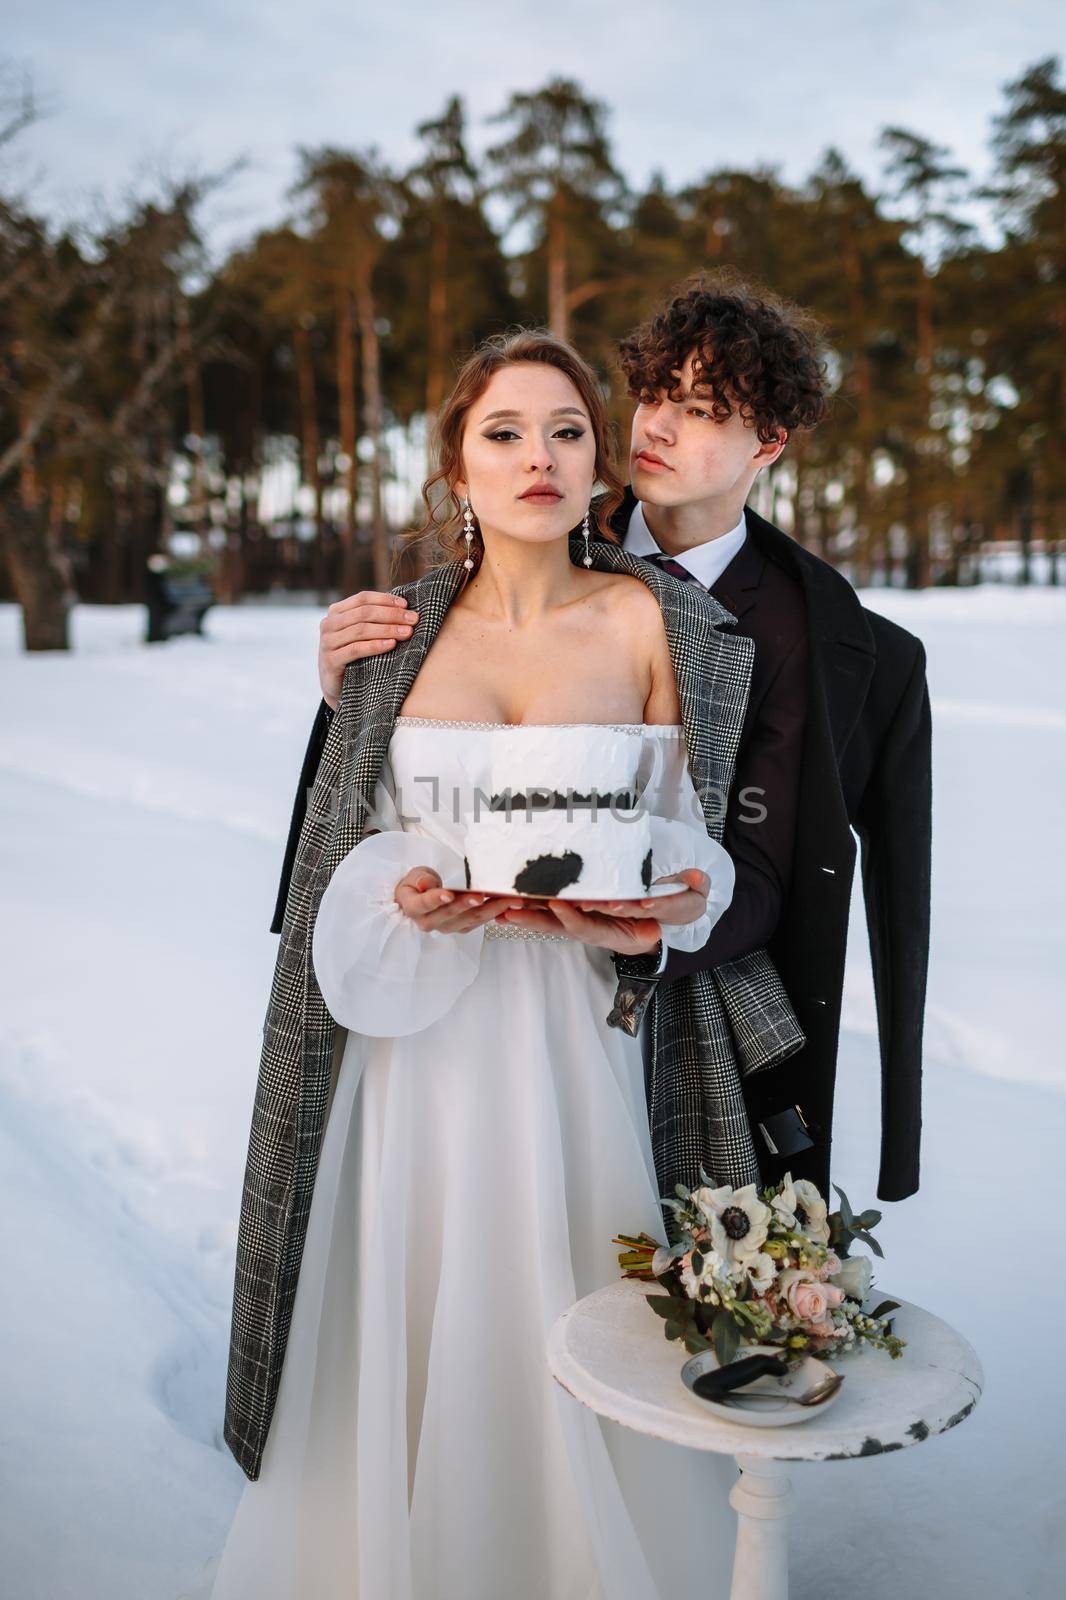 The bride and groom hold a wedding cake in their hands, standing in the snow in the forest by deandy